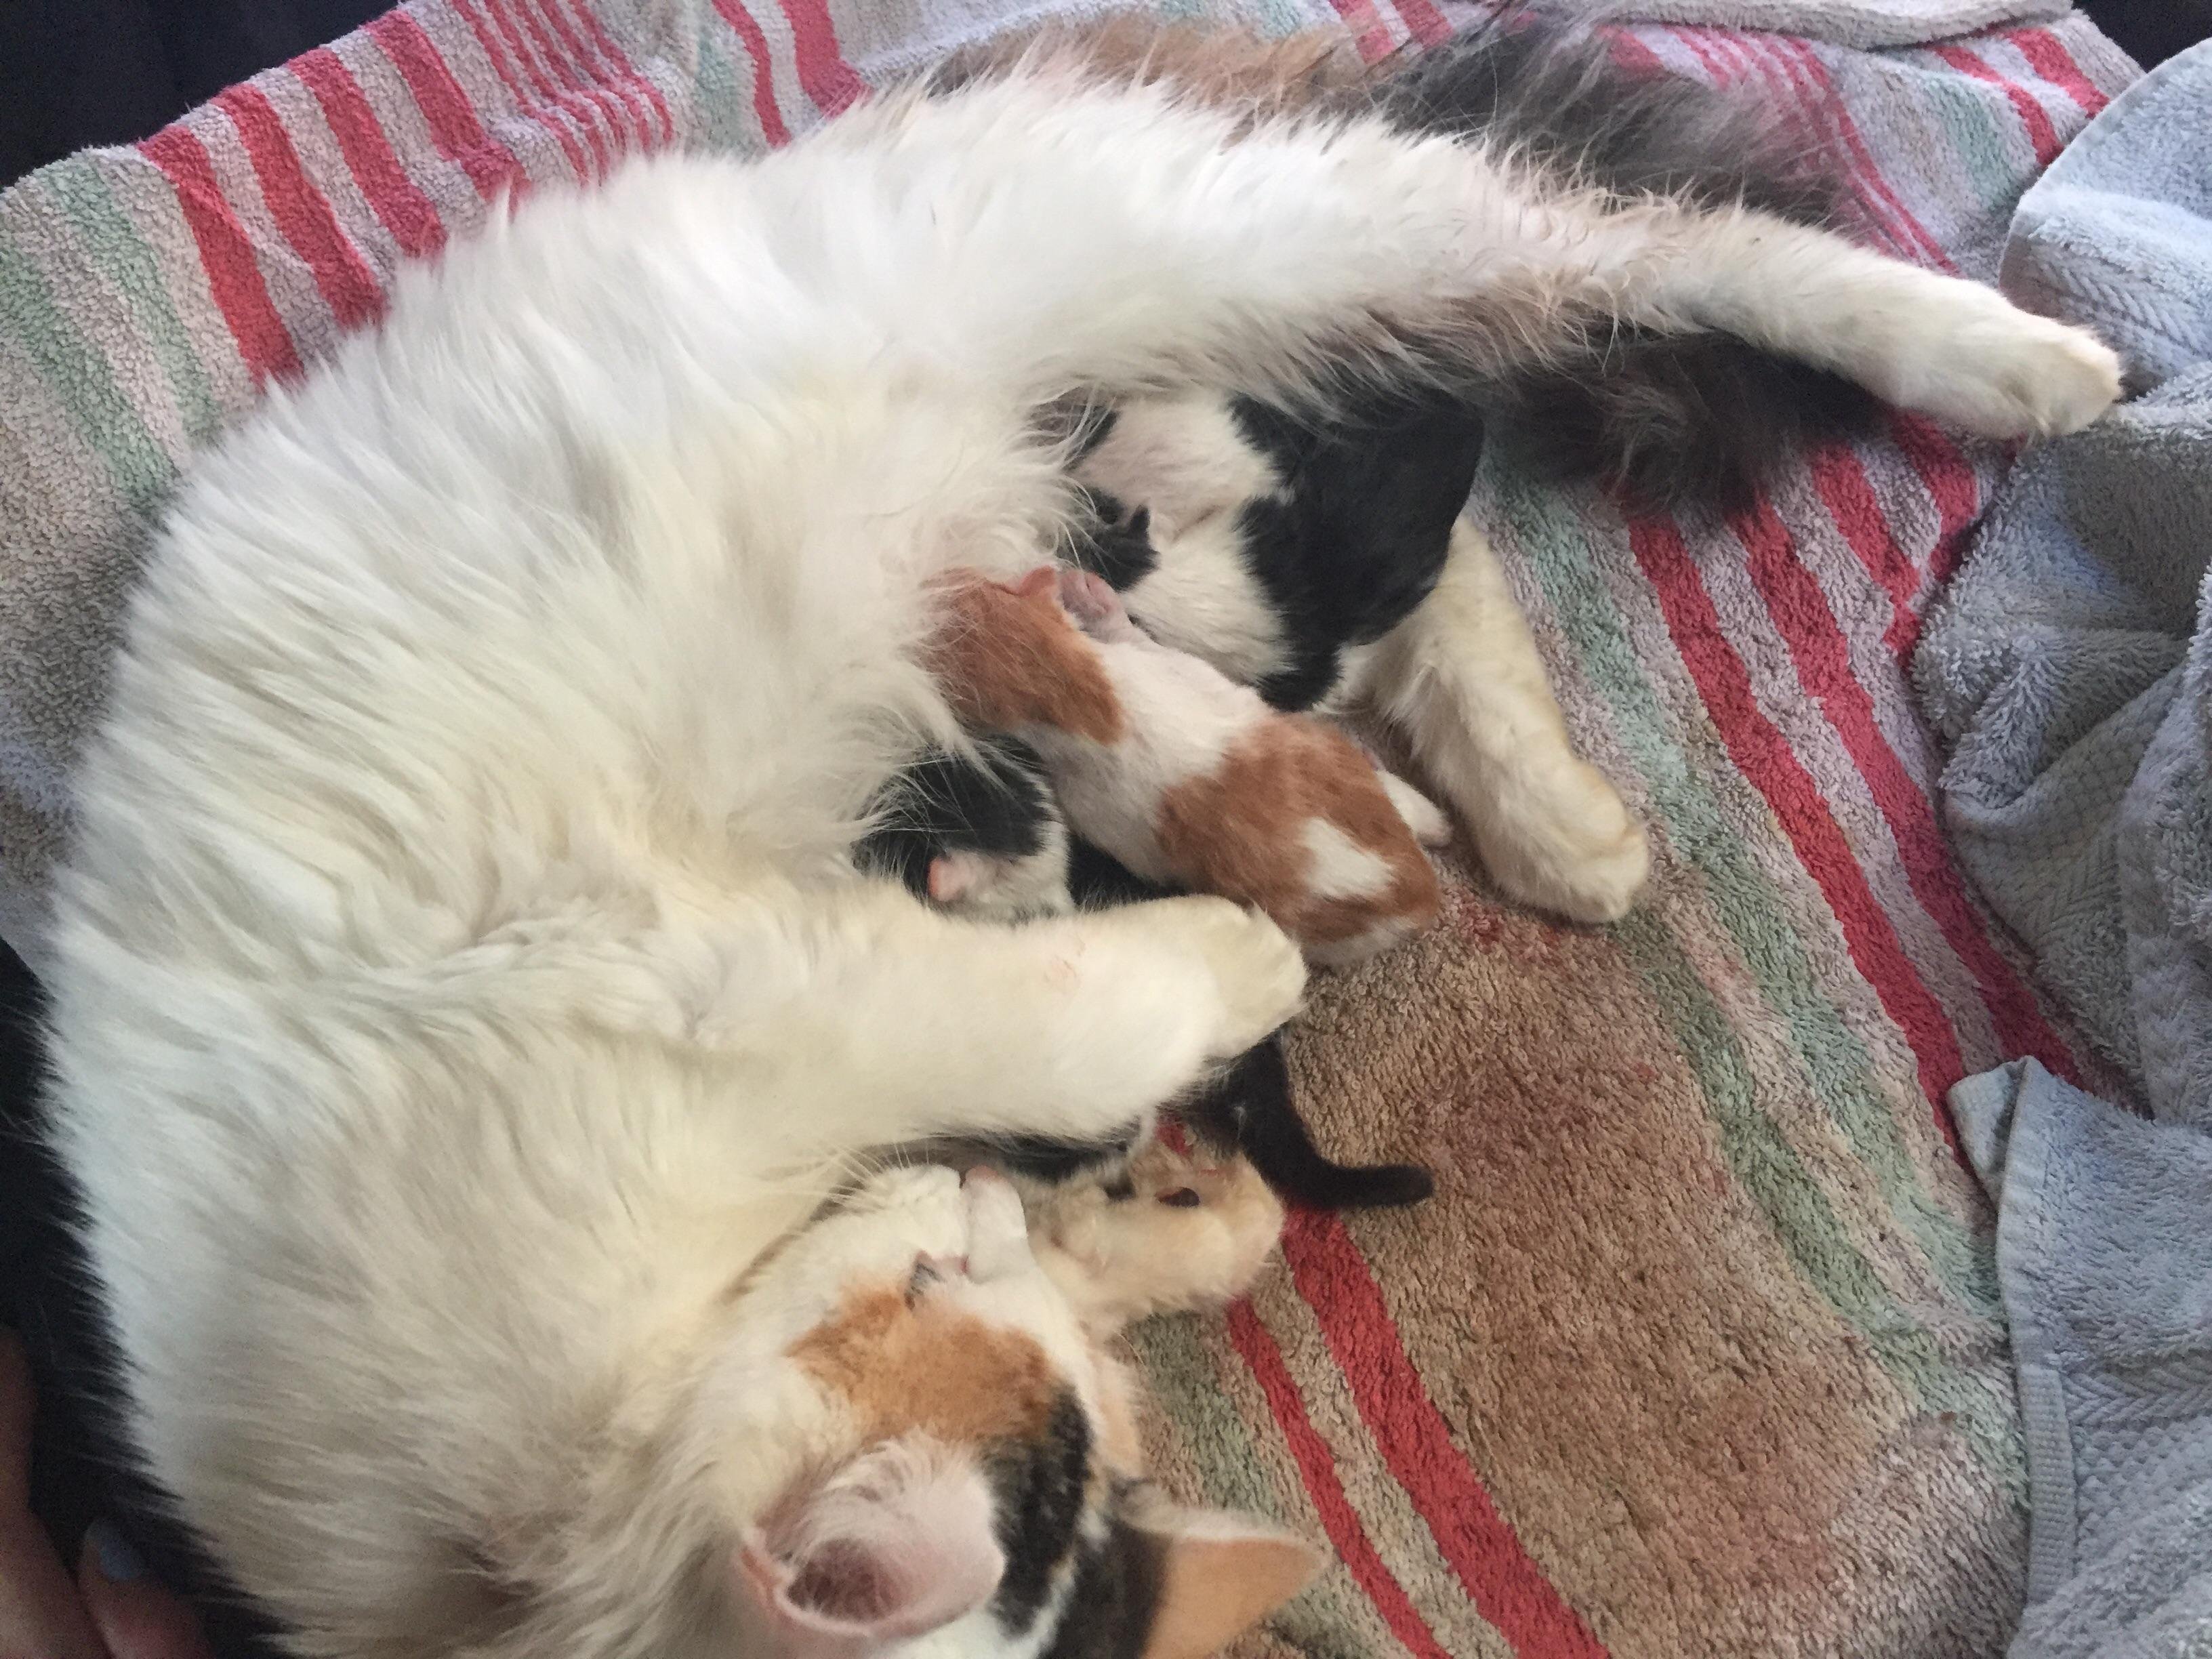 SHE HAD HER KITTENS THIS MORNING AND THEY ARE SO CUTE 